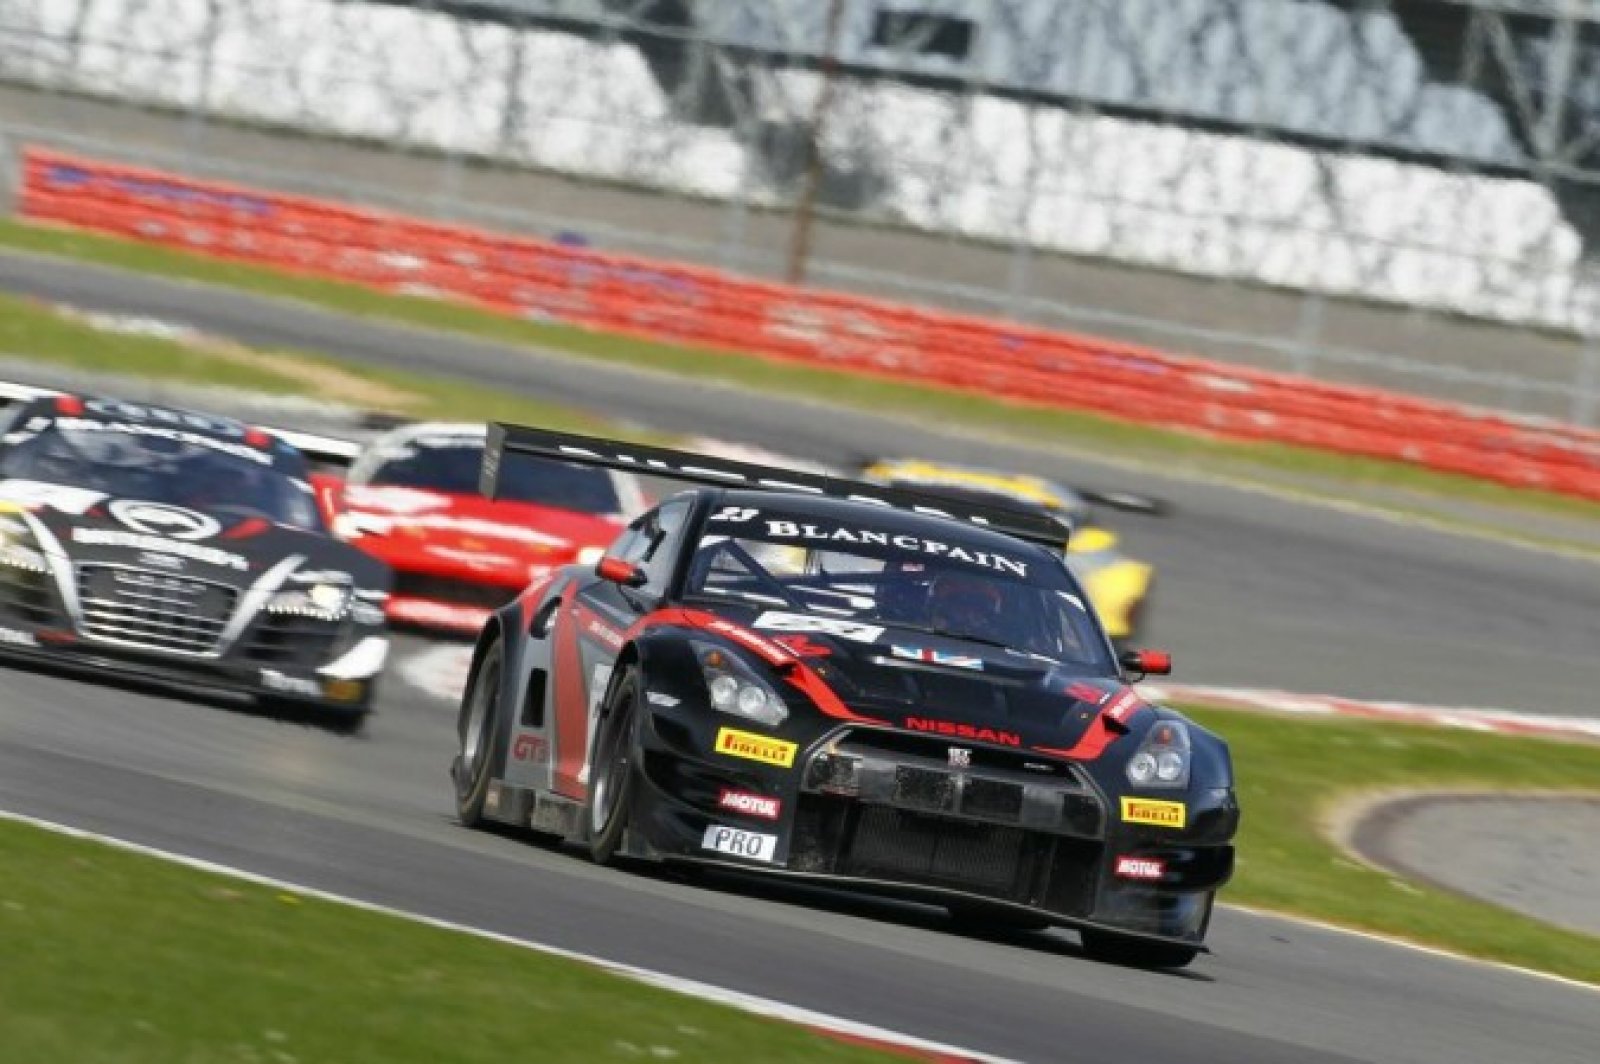 JRM delighted with ‘awesome race’ at Silverstone